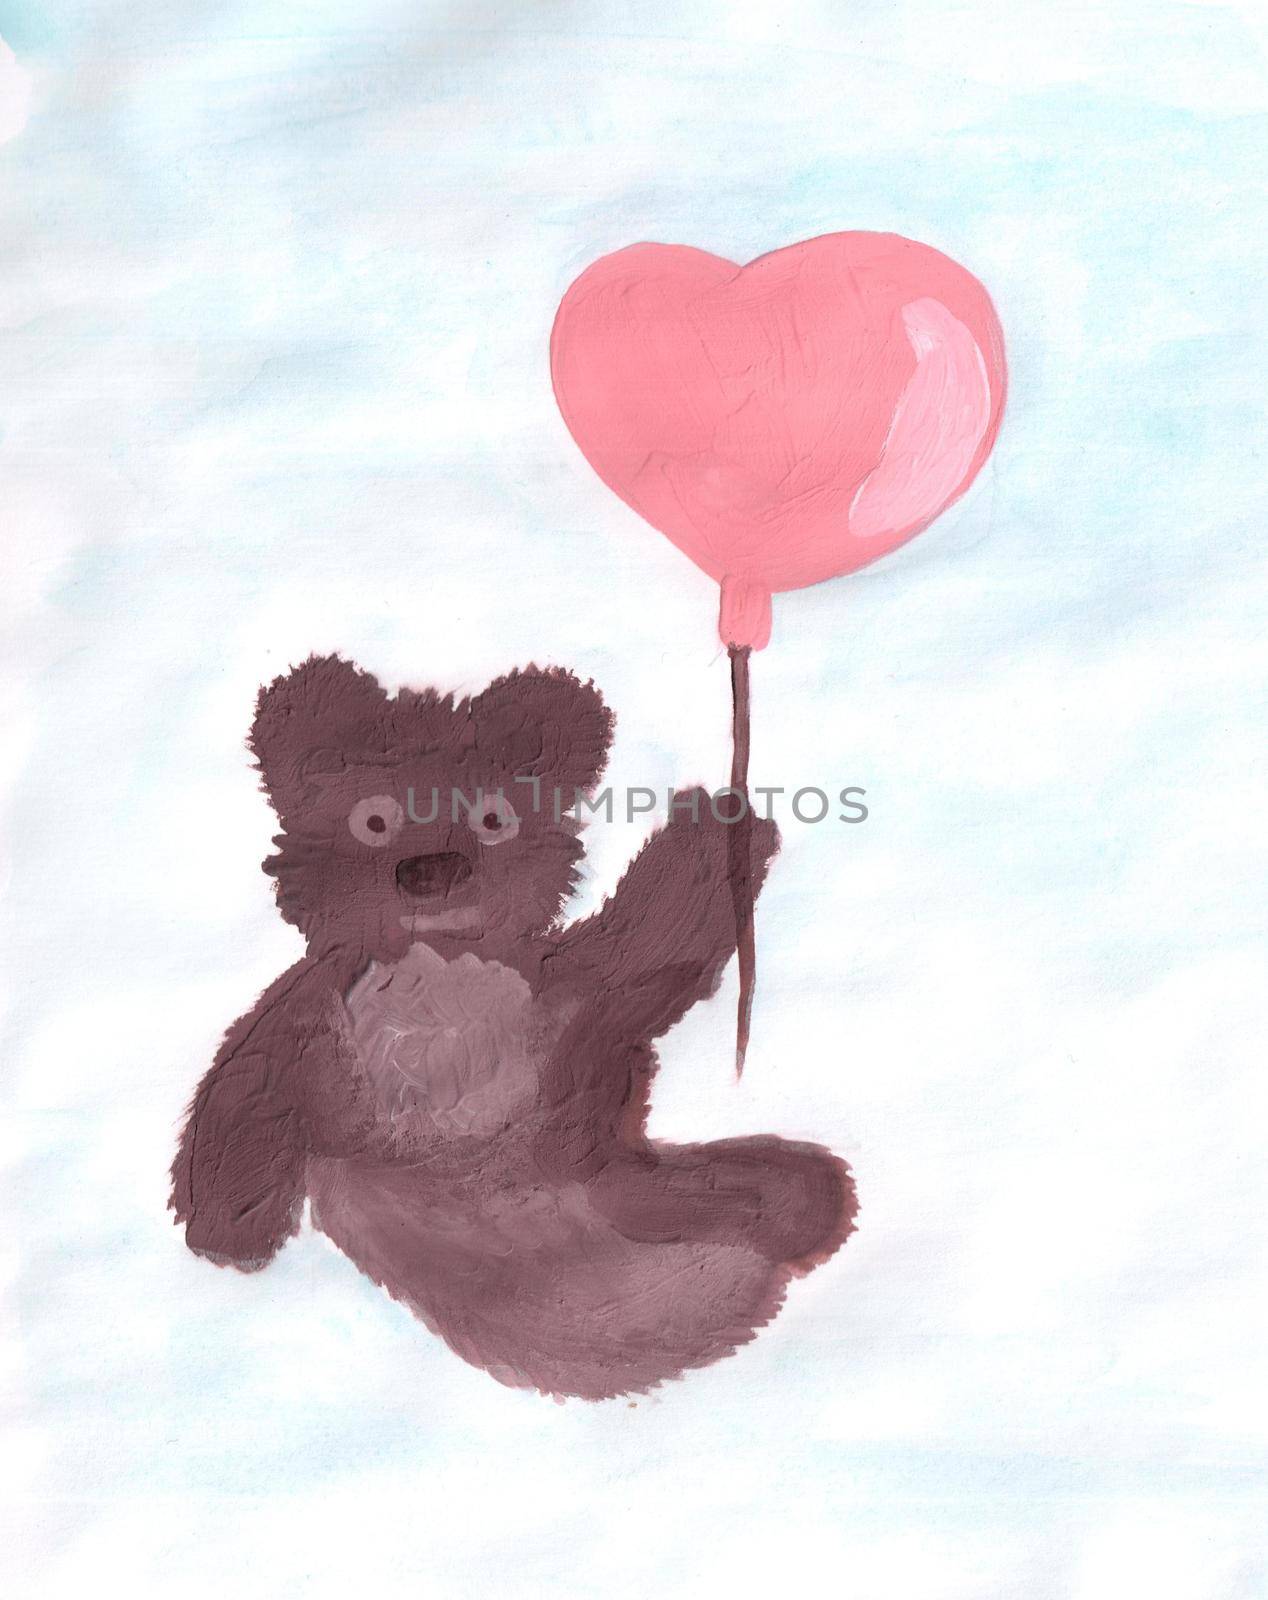 Colored Bear With Balloon doodle sketch illustration.